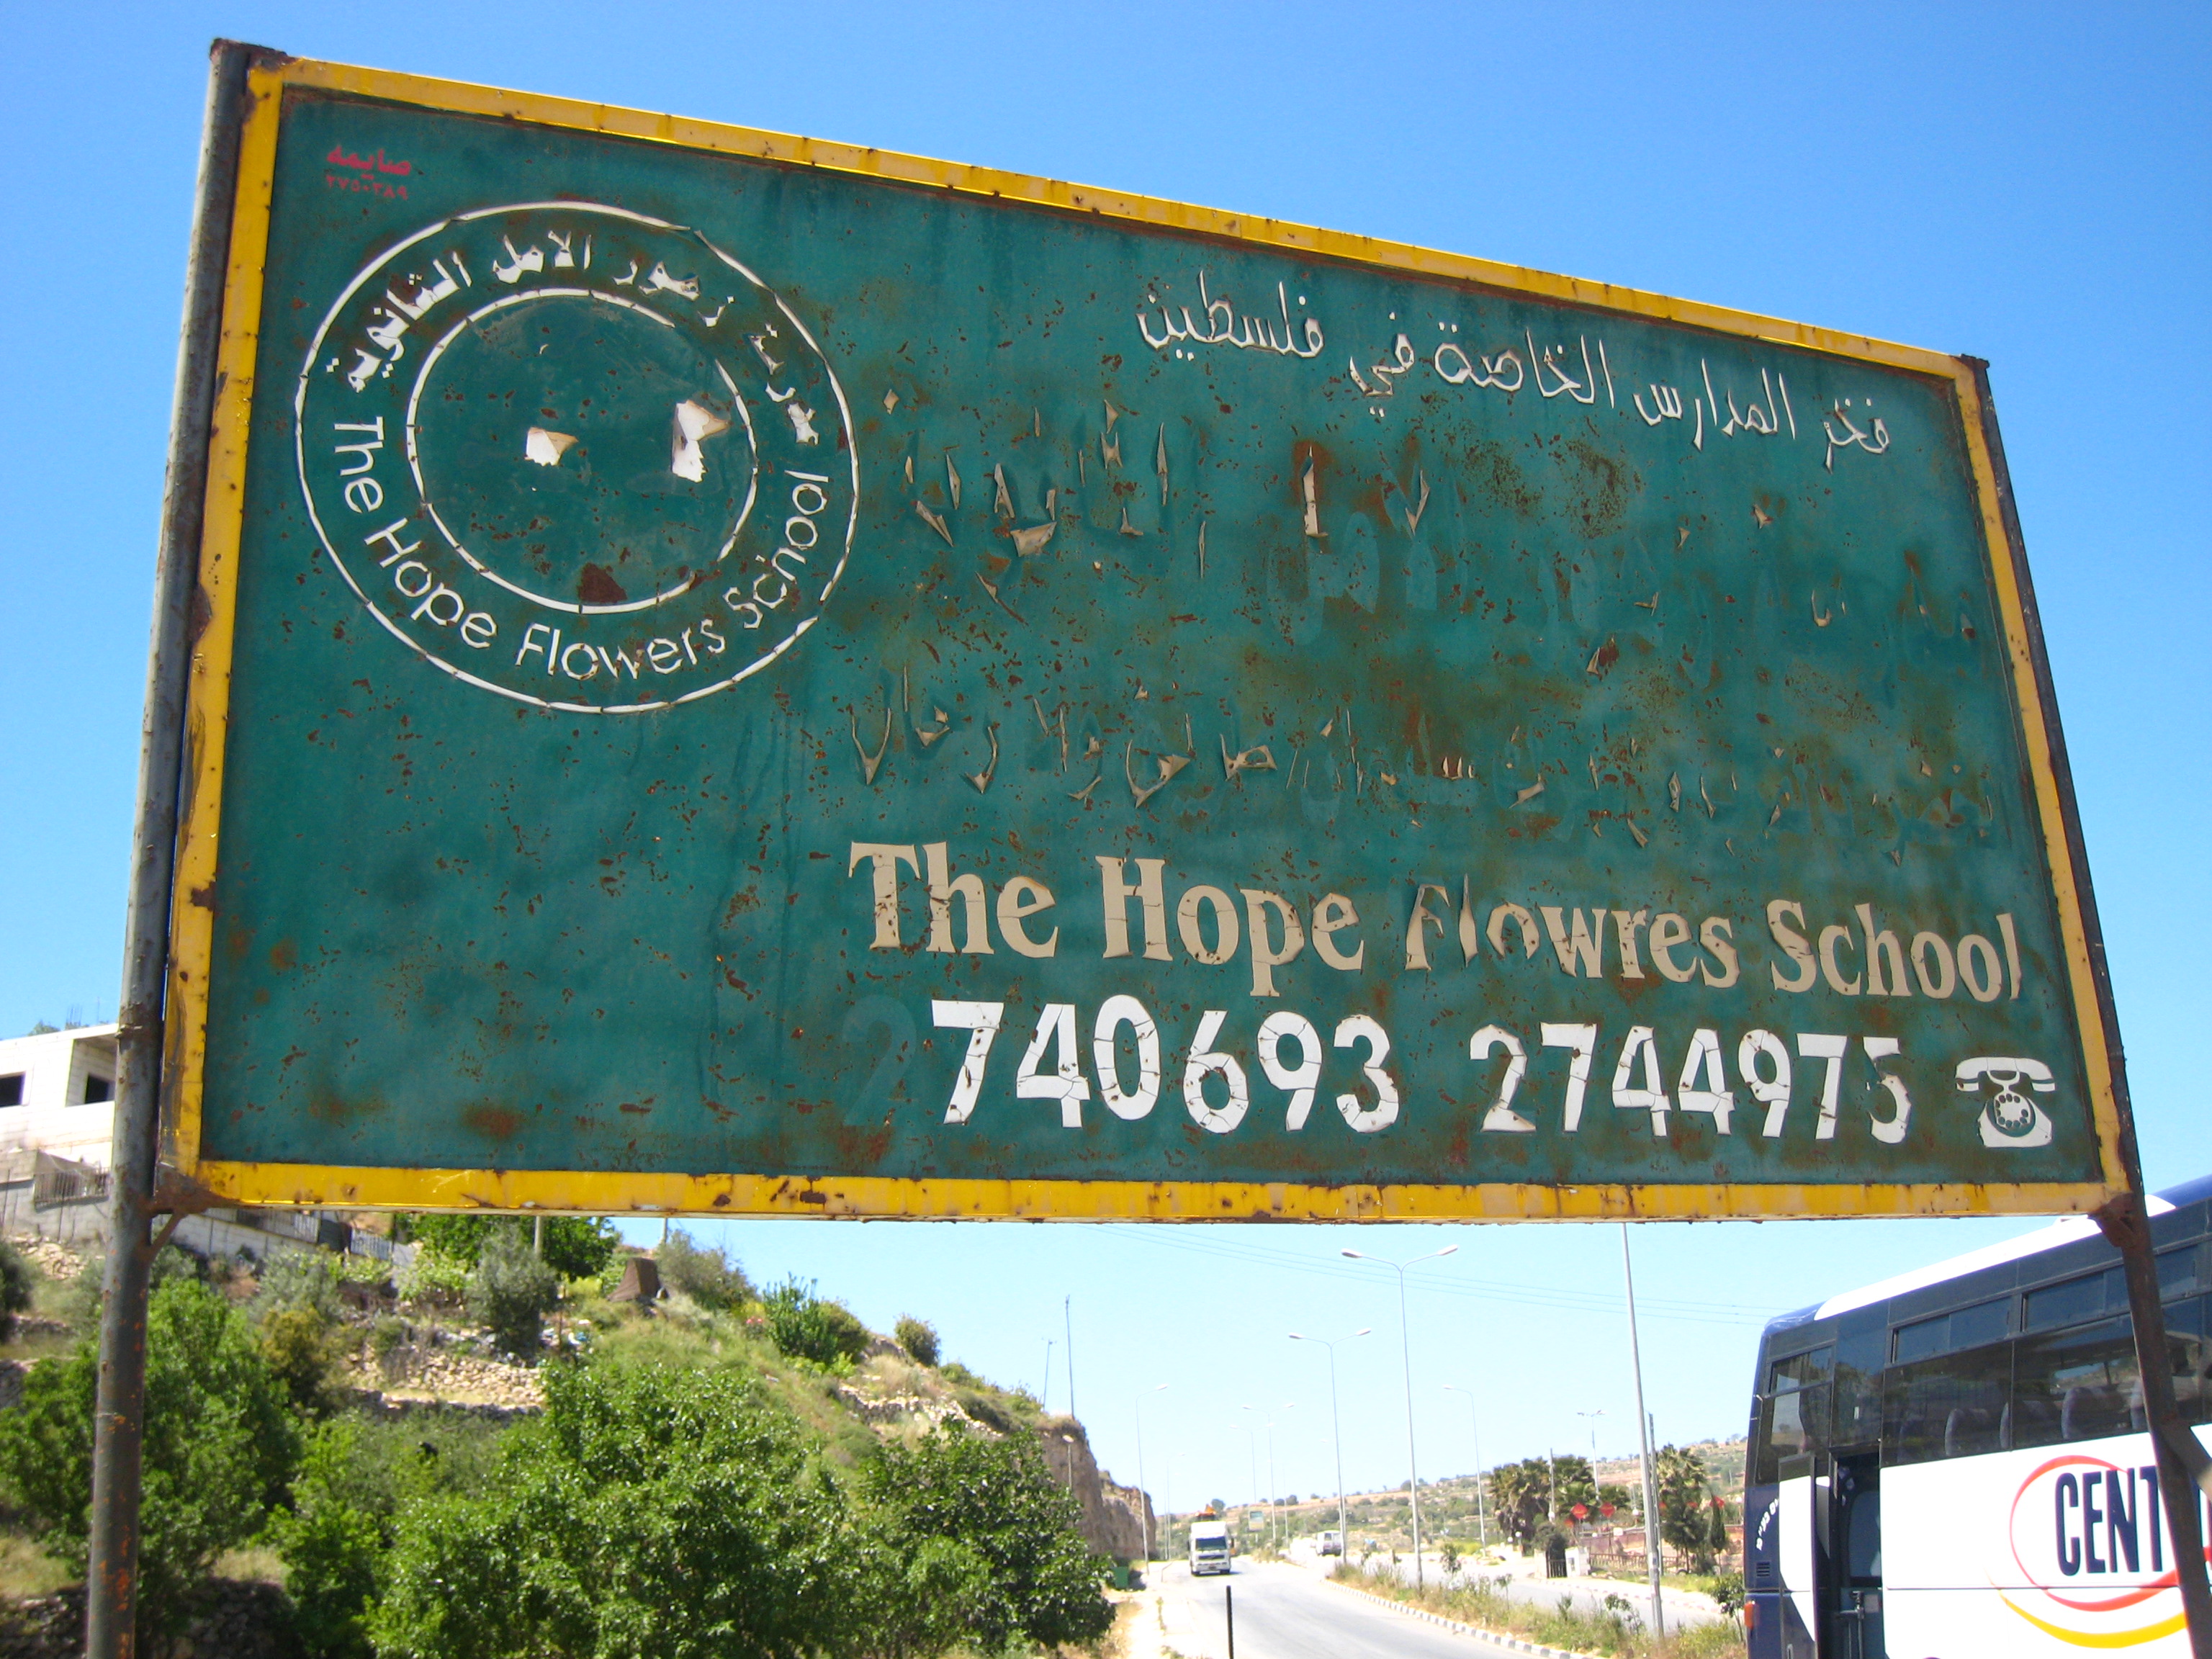 Hope Flowers School hoarding (photo: Chadica, from Jerusalem, Israel - Hope Flower School, CC BY 2.0, https://commons.wikimedia.org/w/index.php?curid=35294268)